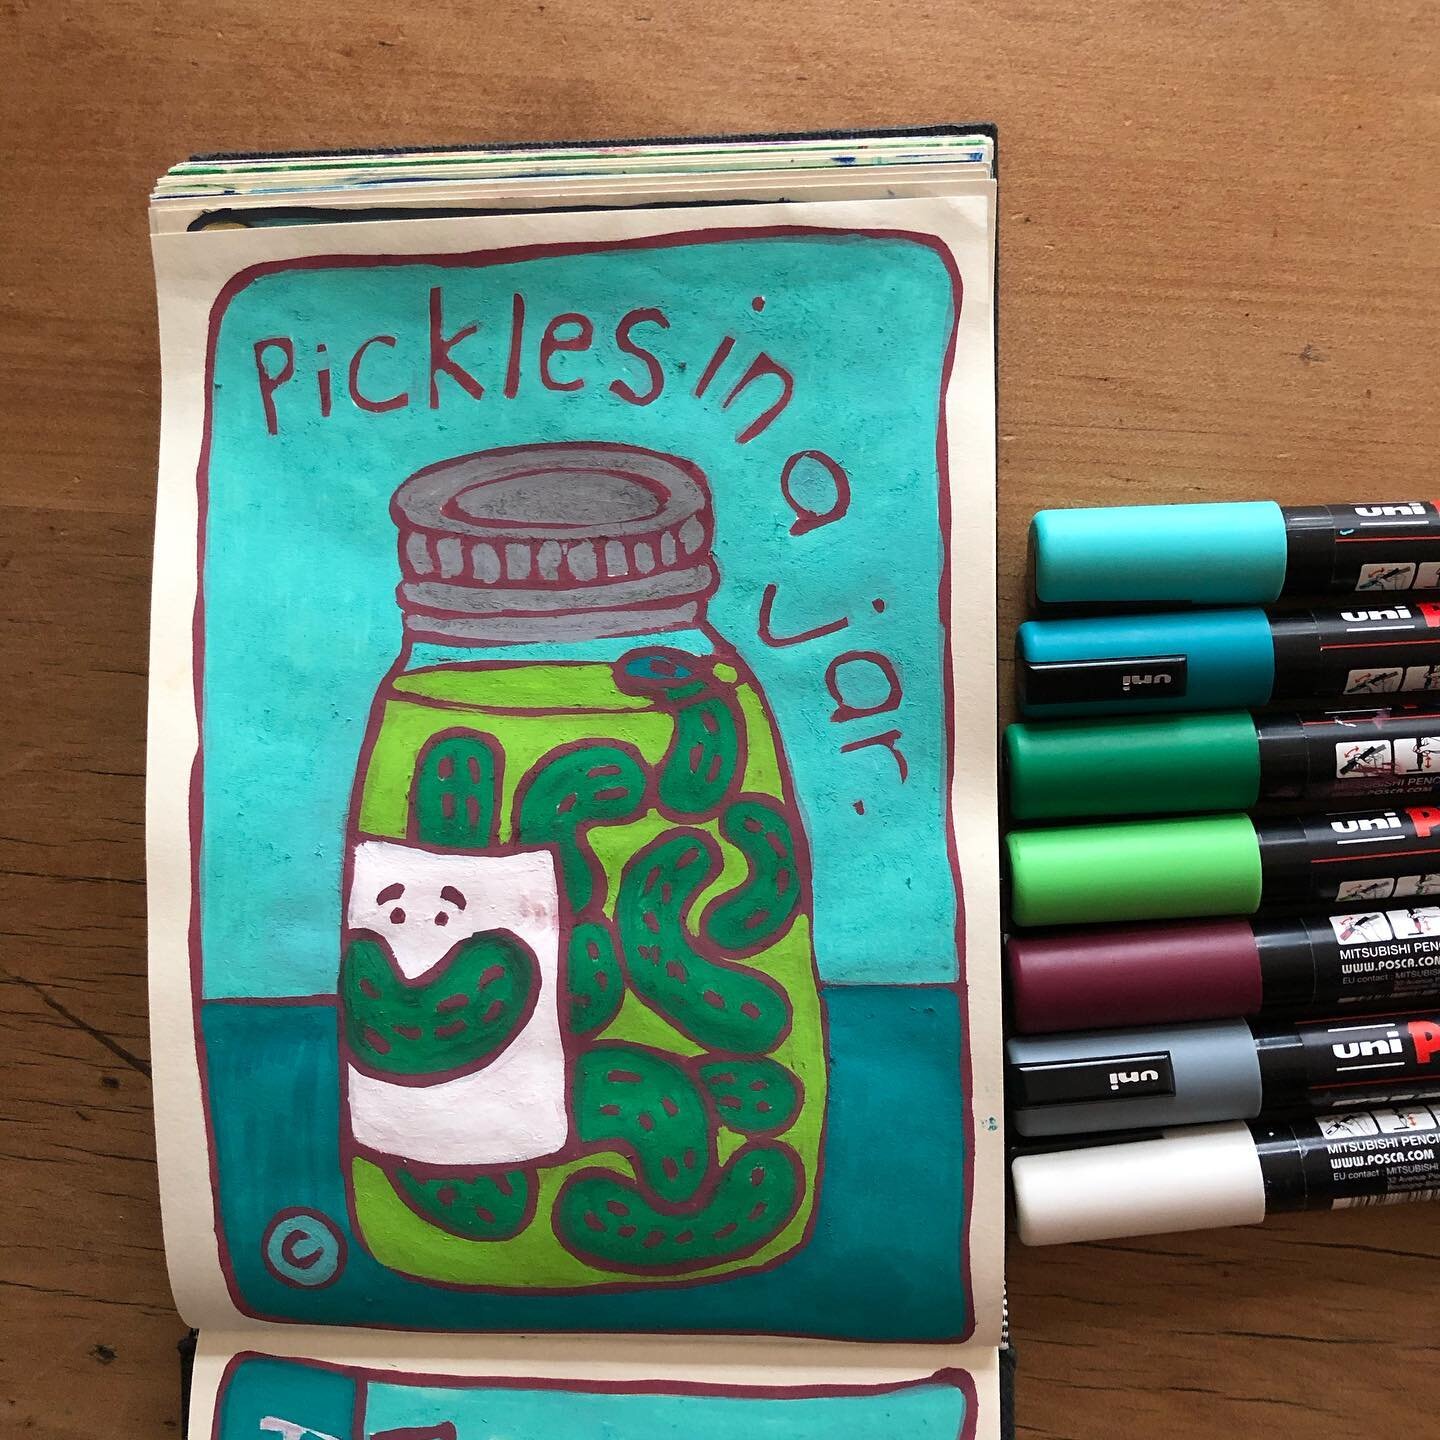 More pickles in my life might do the trick!

#posca #dailyillustration #poscapens #sketchbookdrawing #pickles